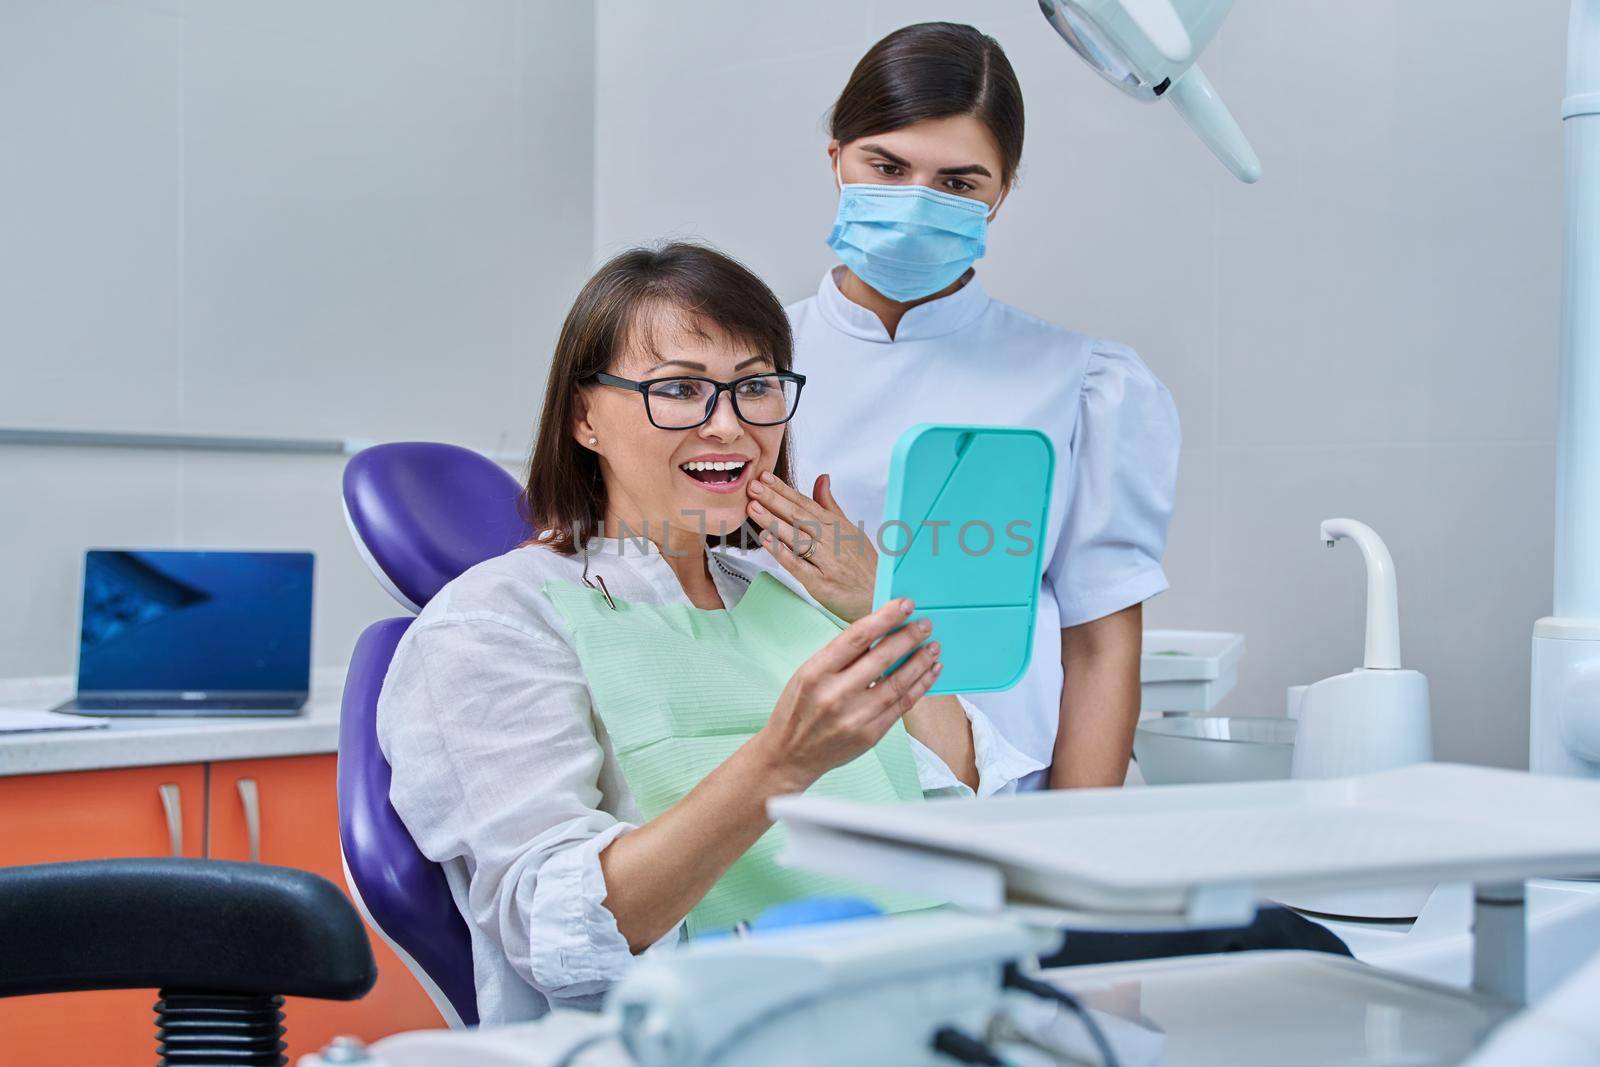 Woman patient together with dentist, patient sitting in dental chair looking at mirror by VH-studio